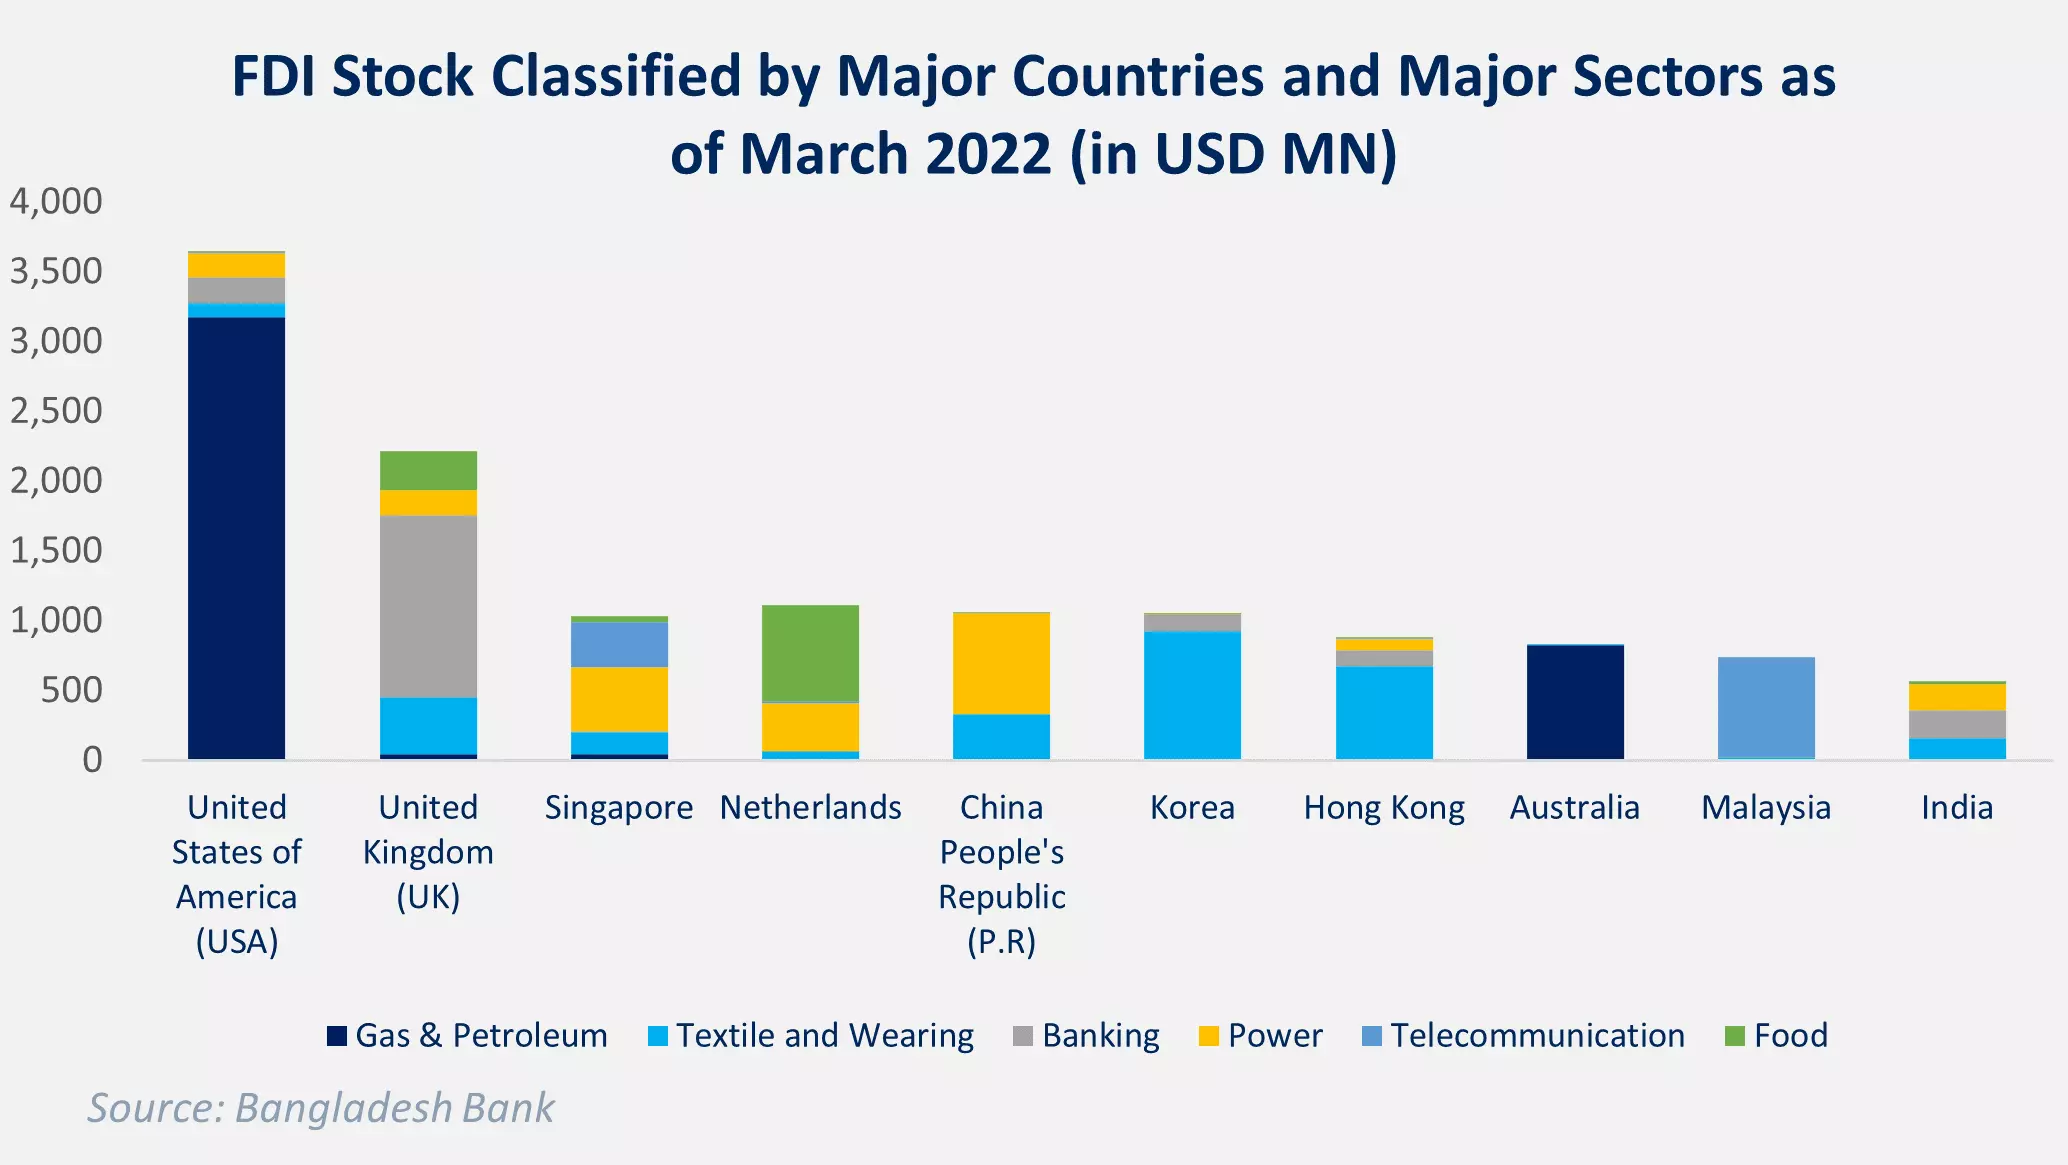 FDI Stock Classified by Major Countries and Major Sectors as of March 2022